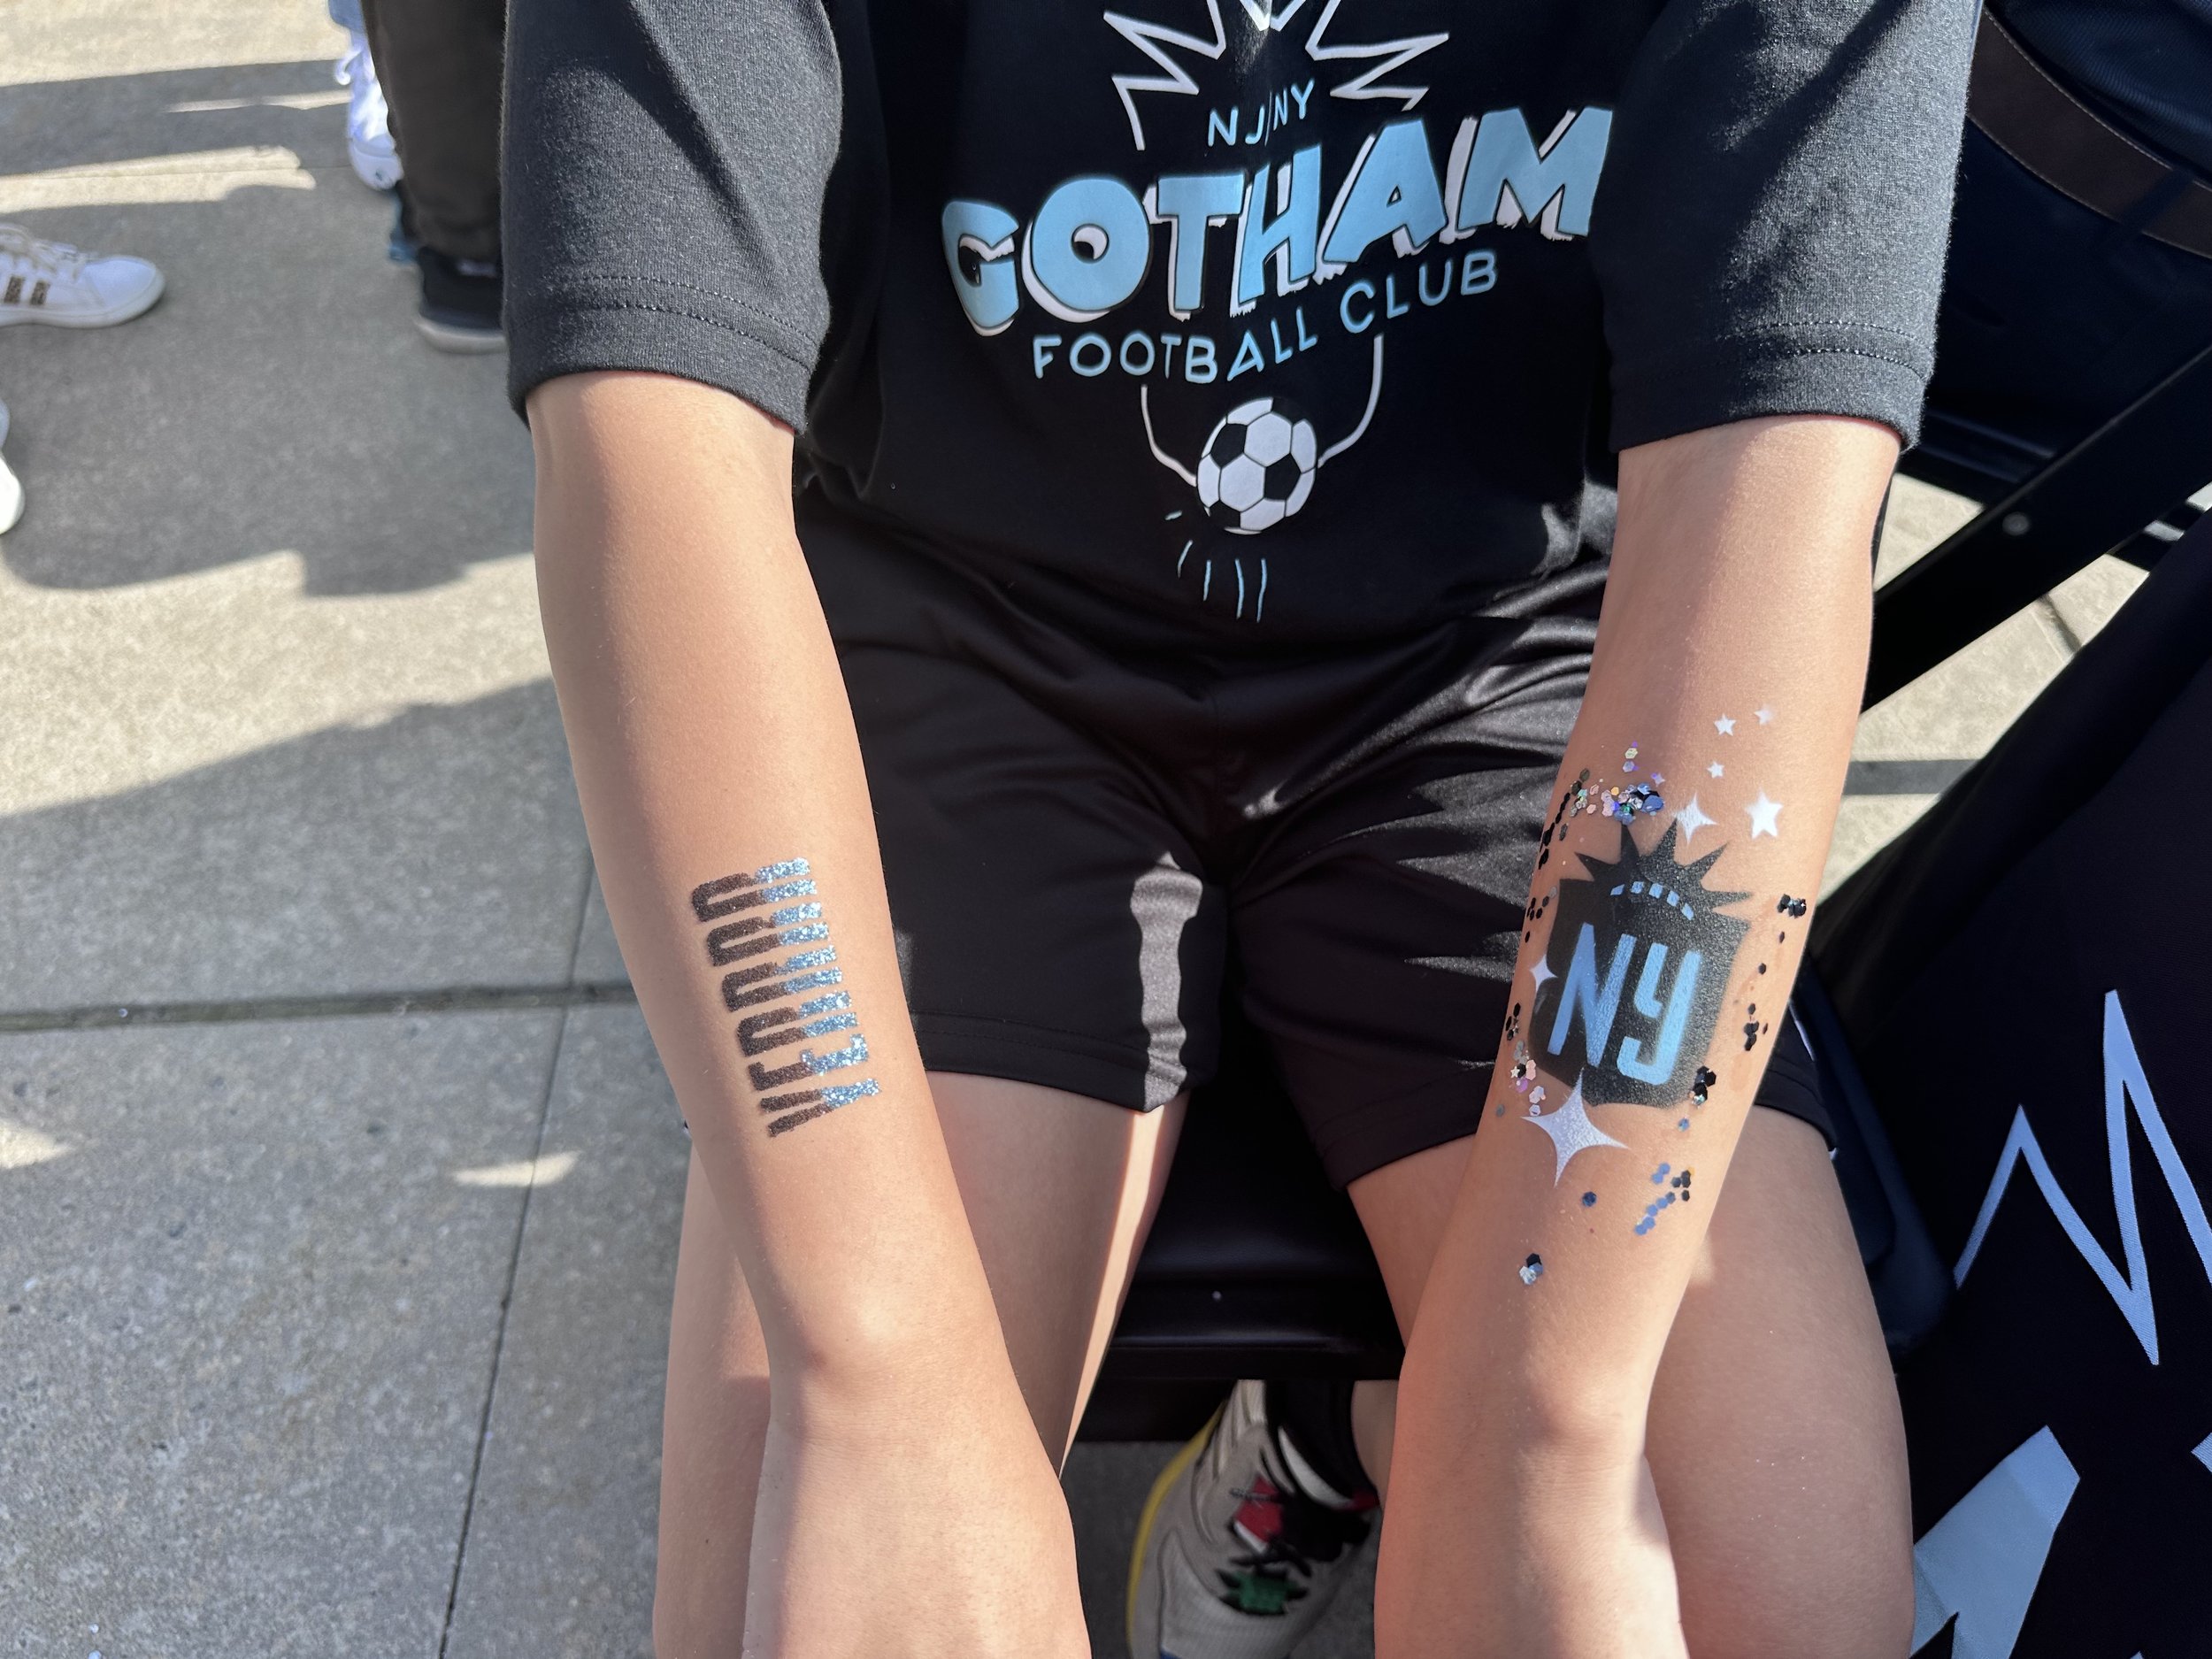 Gotham FC Airbrush Tattoos for Parties Events and Large Events NYC and Brooklyn.jpeg